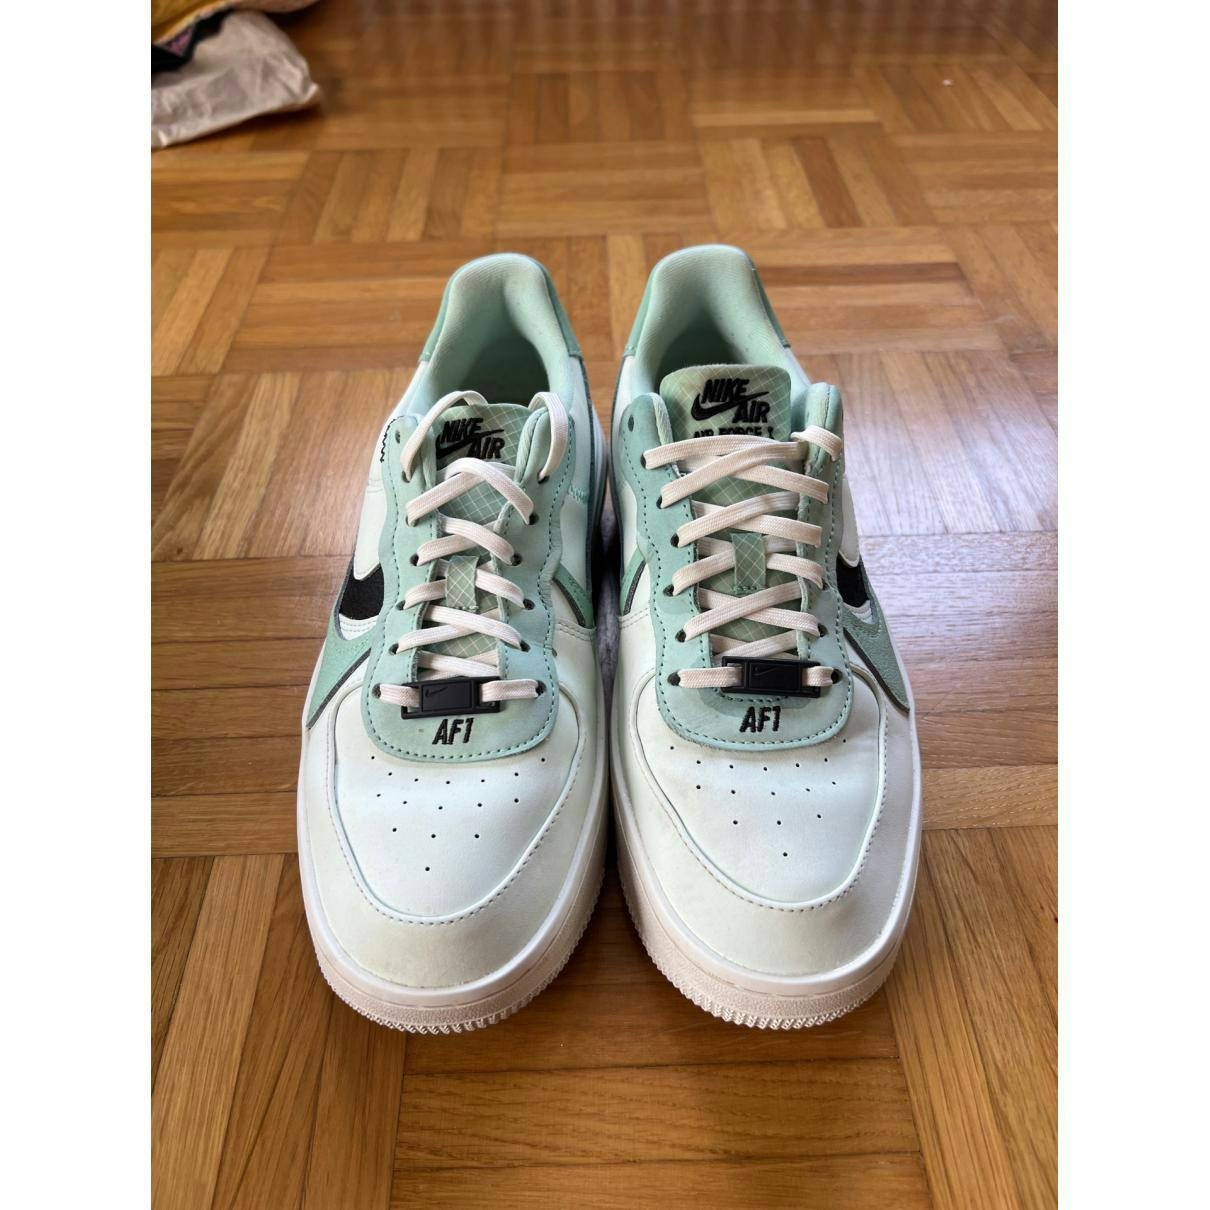 https://images.vestiairecollective.com/cdn-cgi/image/q=75,f=auto,/produit/green-leather-air-force-1-nike-trainers-34609810-6_3.jpg?secret=VC-e9eee96a-a819-4431-ad12-d066be2626ef